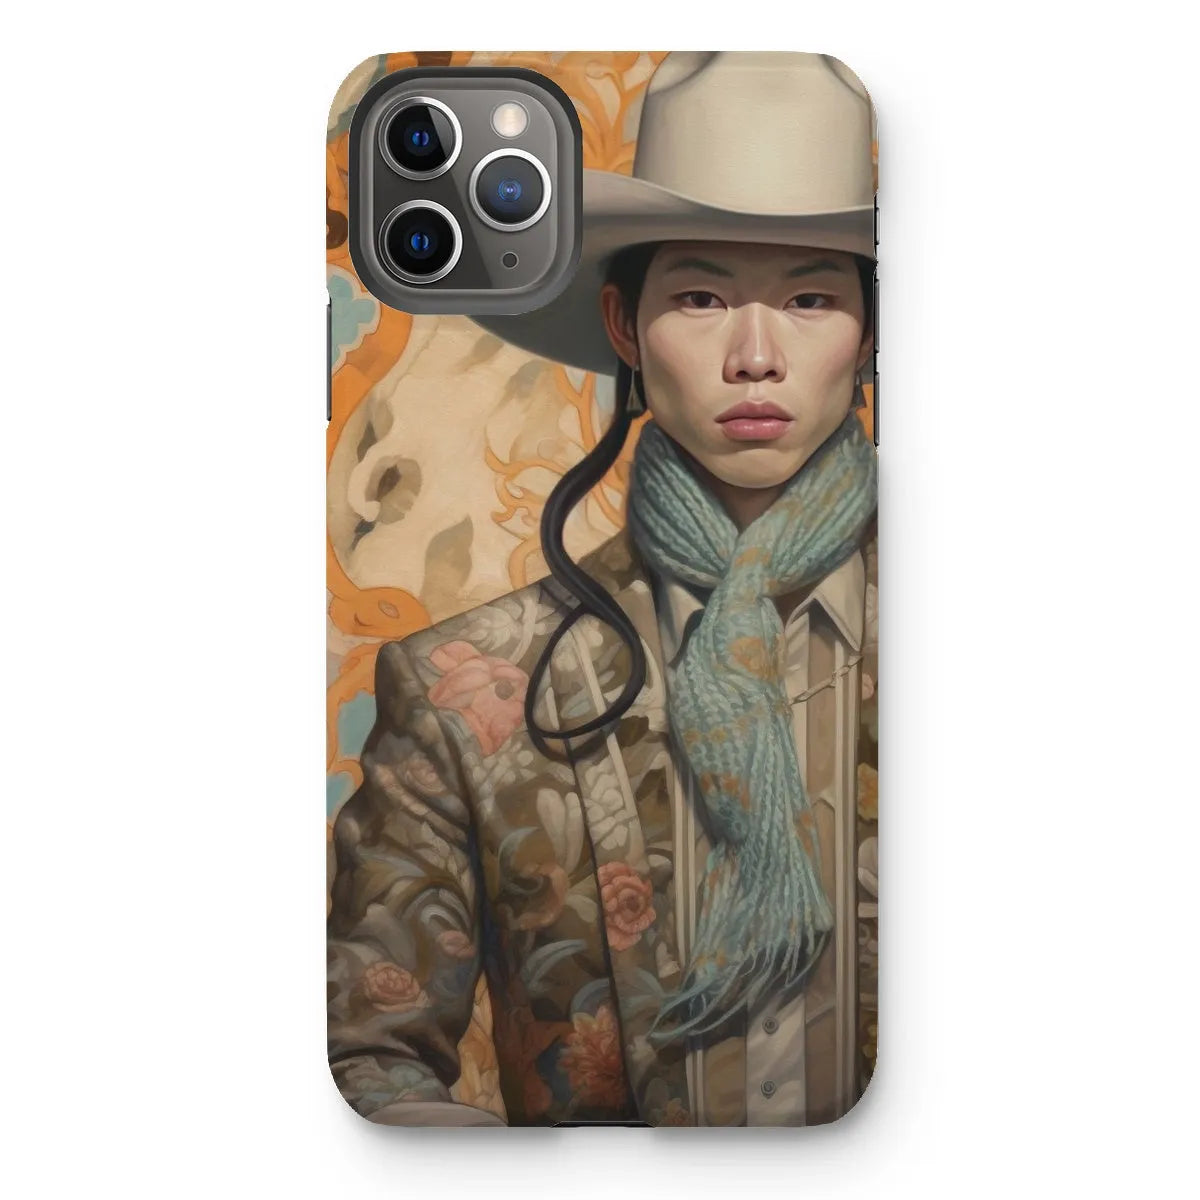 Baihu The Gay Cowboy - Gay Aesthetic Art Phone Case - Iphone 11 Pro Max / Matte - Mobile Phone Cases - Aesthetic Art